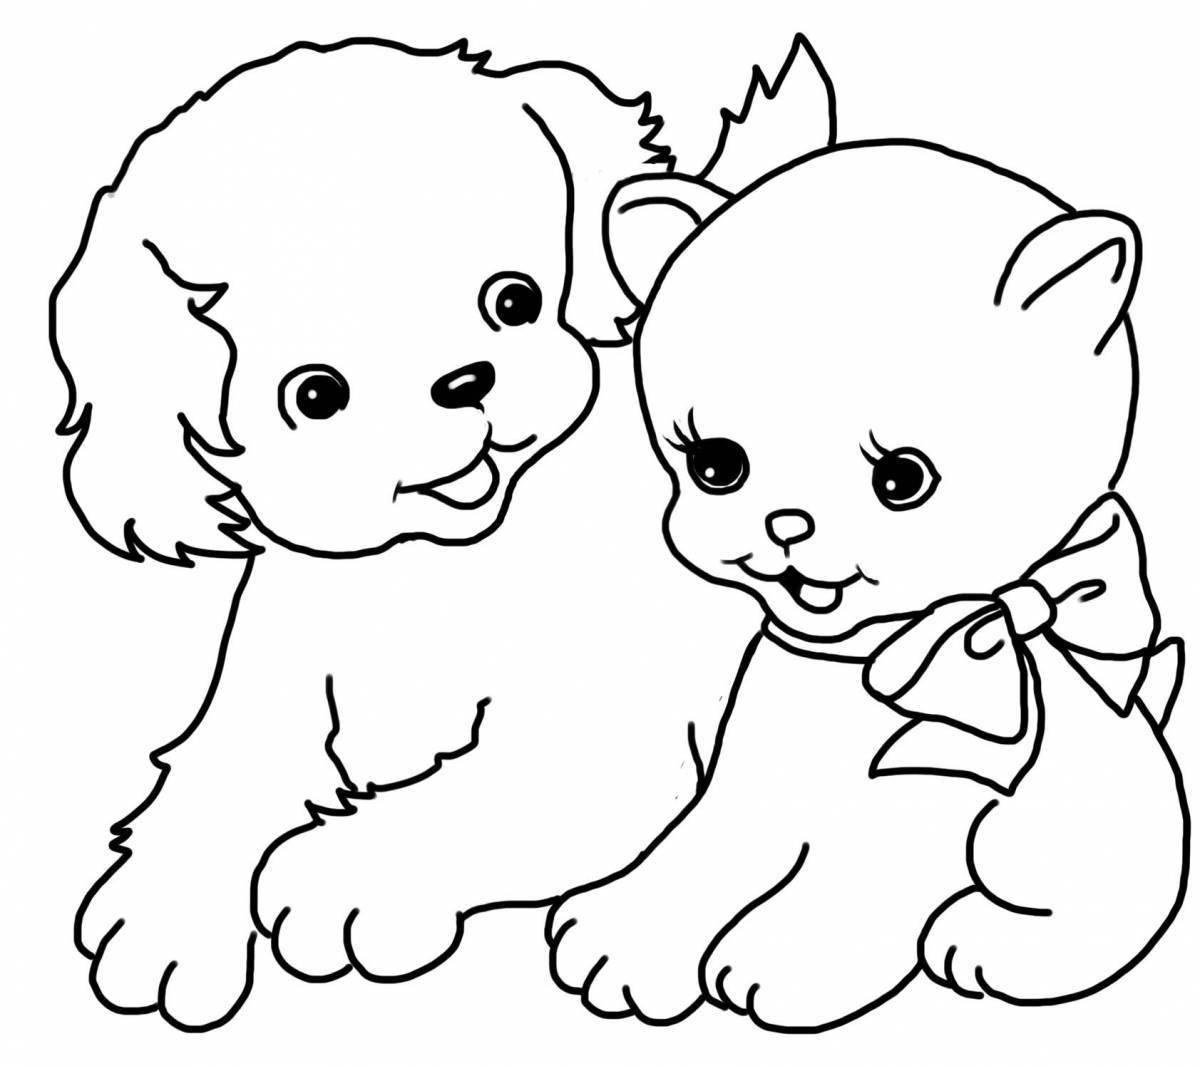 Live cute dog coloring